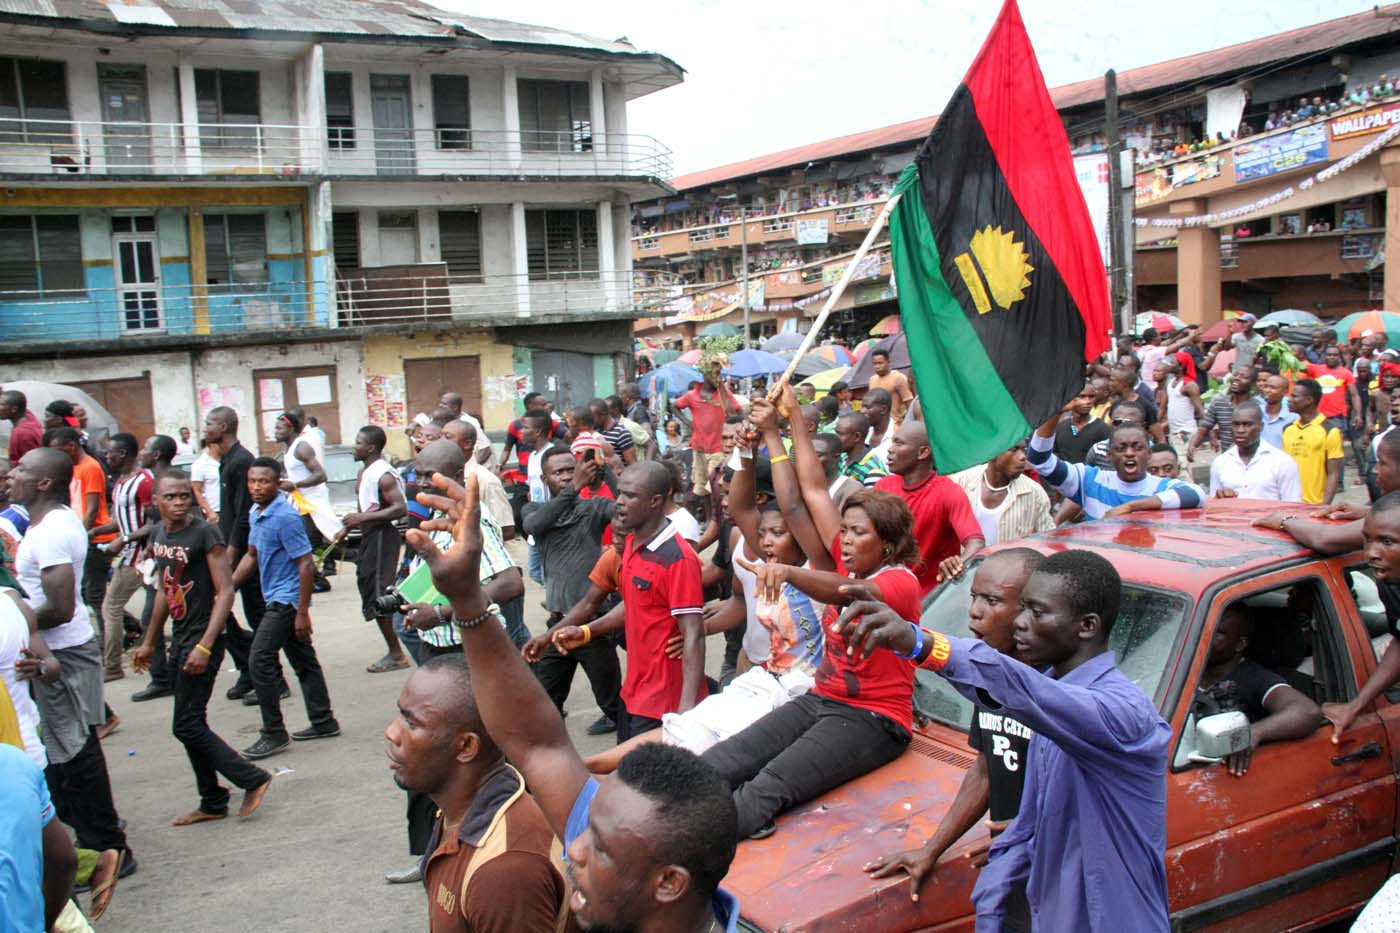 Biafra - The Indigenous People of Biafra on a Peaceful Protest along Ikwerre road in PH, Rivers state, over the arrest of the Director of Radio Biafra Oct 2015